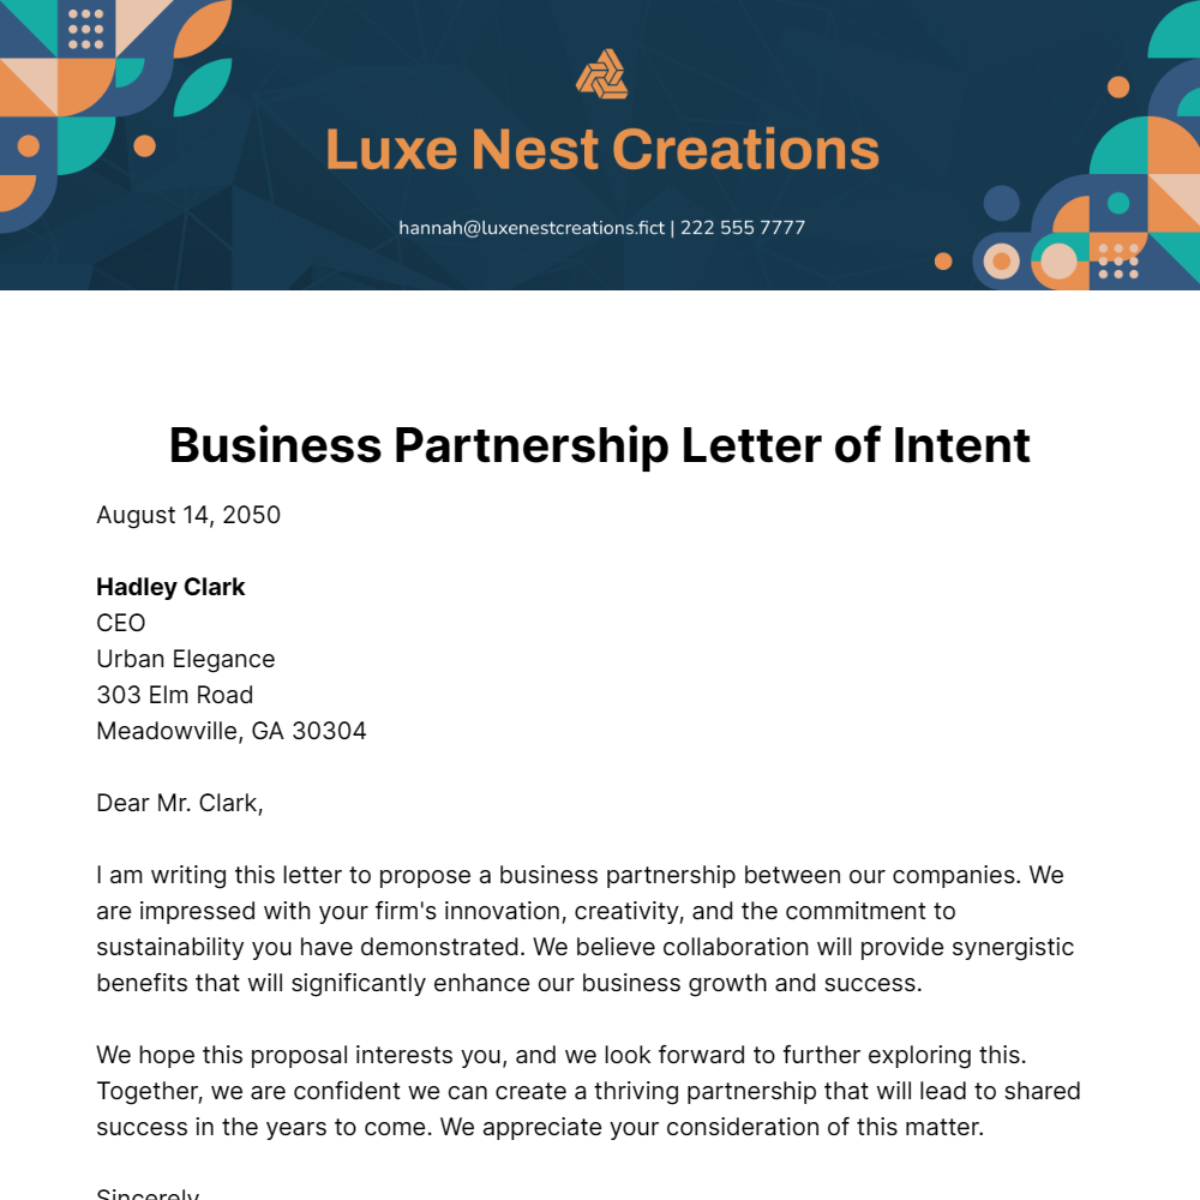 Business Partnership Letter of Intent Template